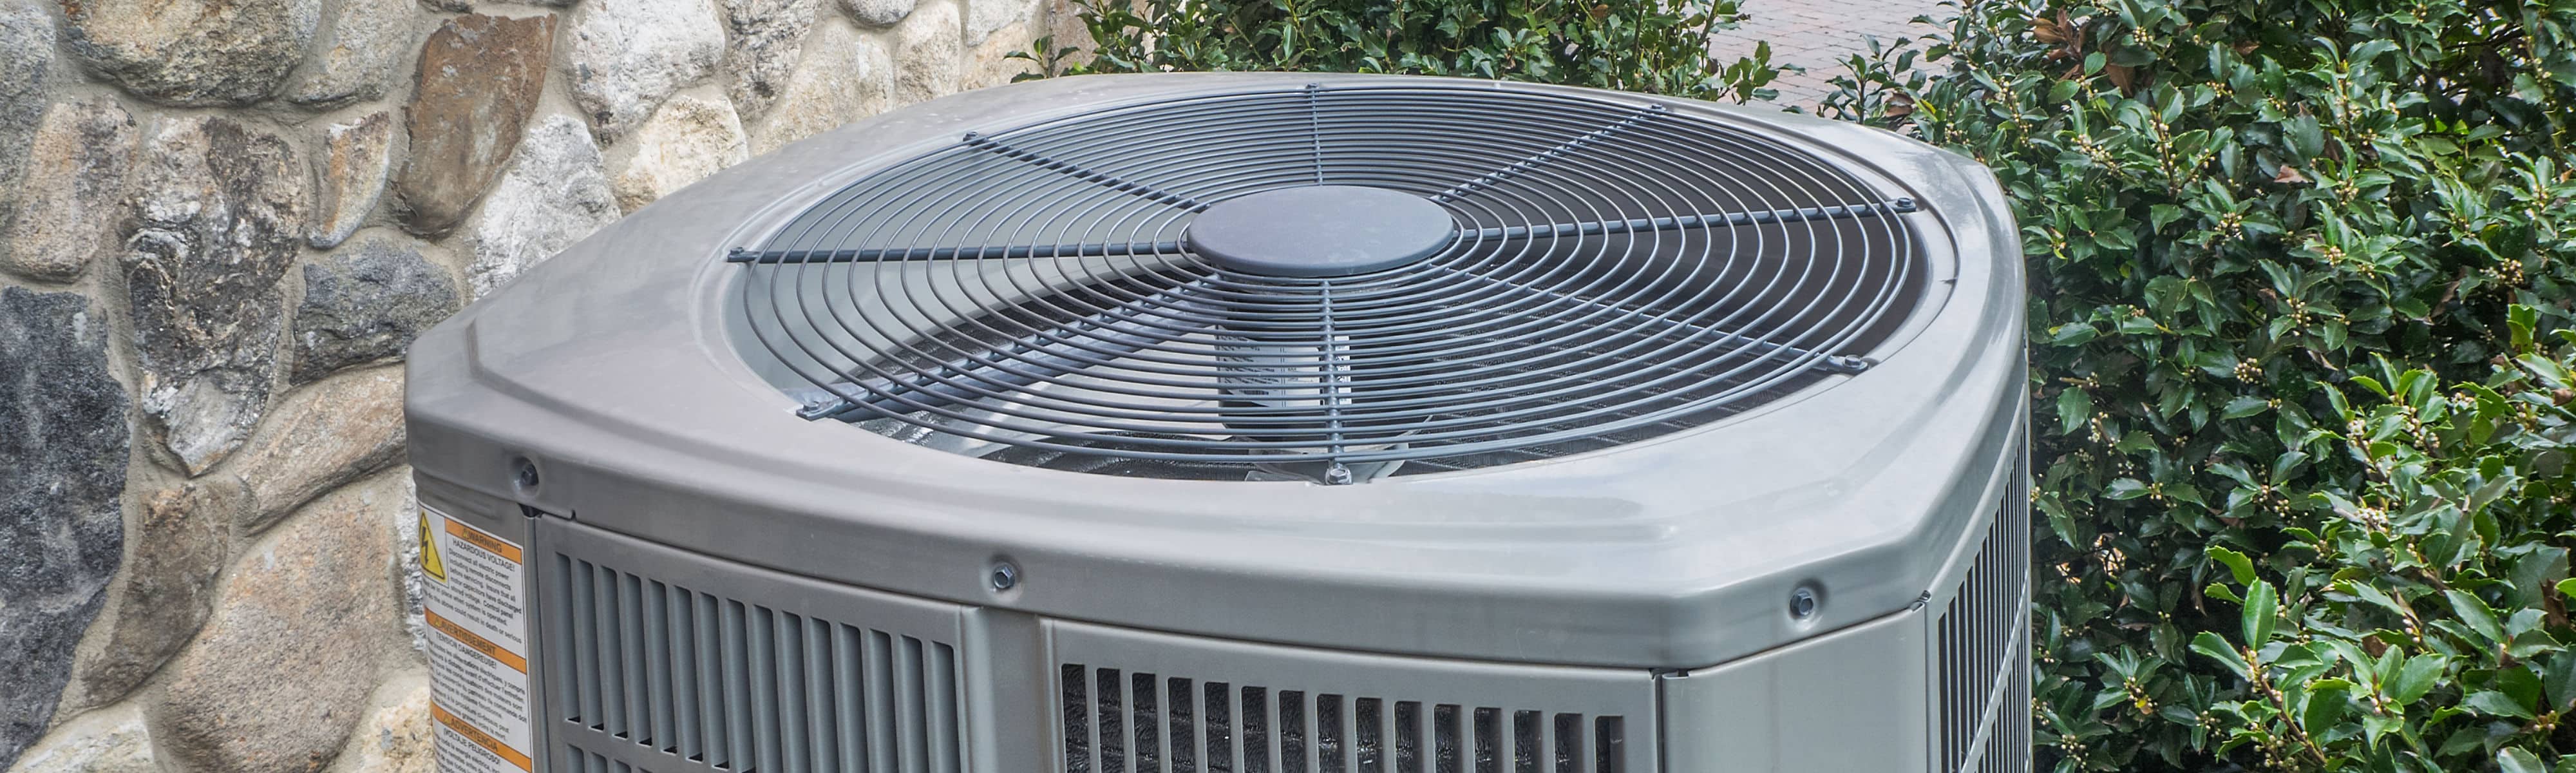 Close up of an outdoor air conditioner.